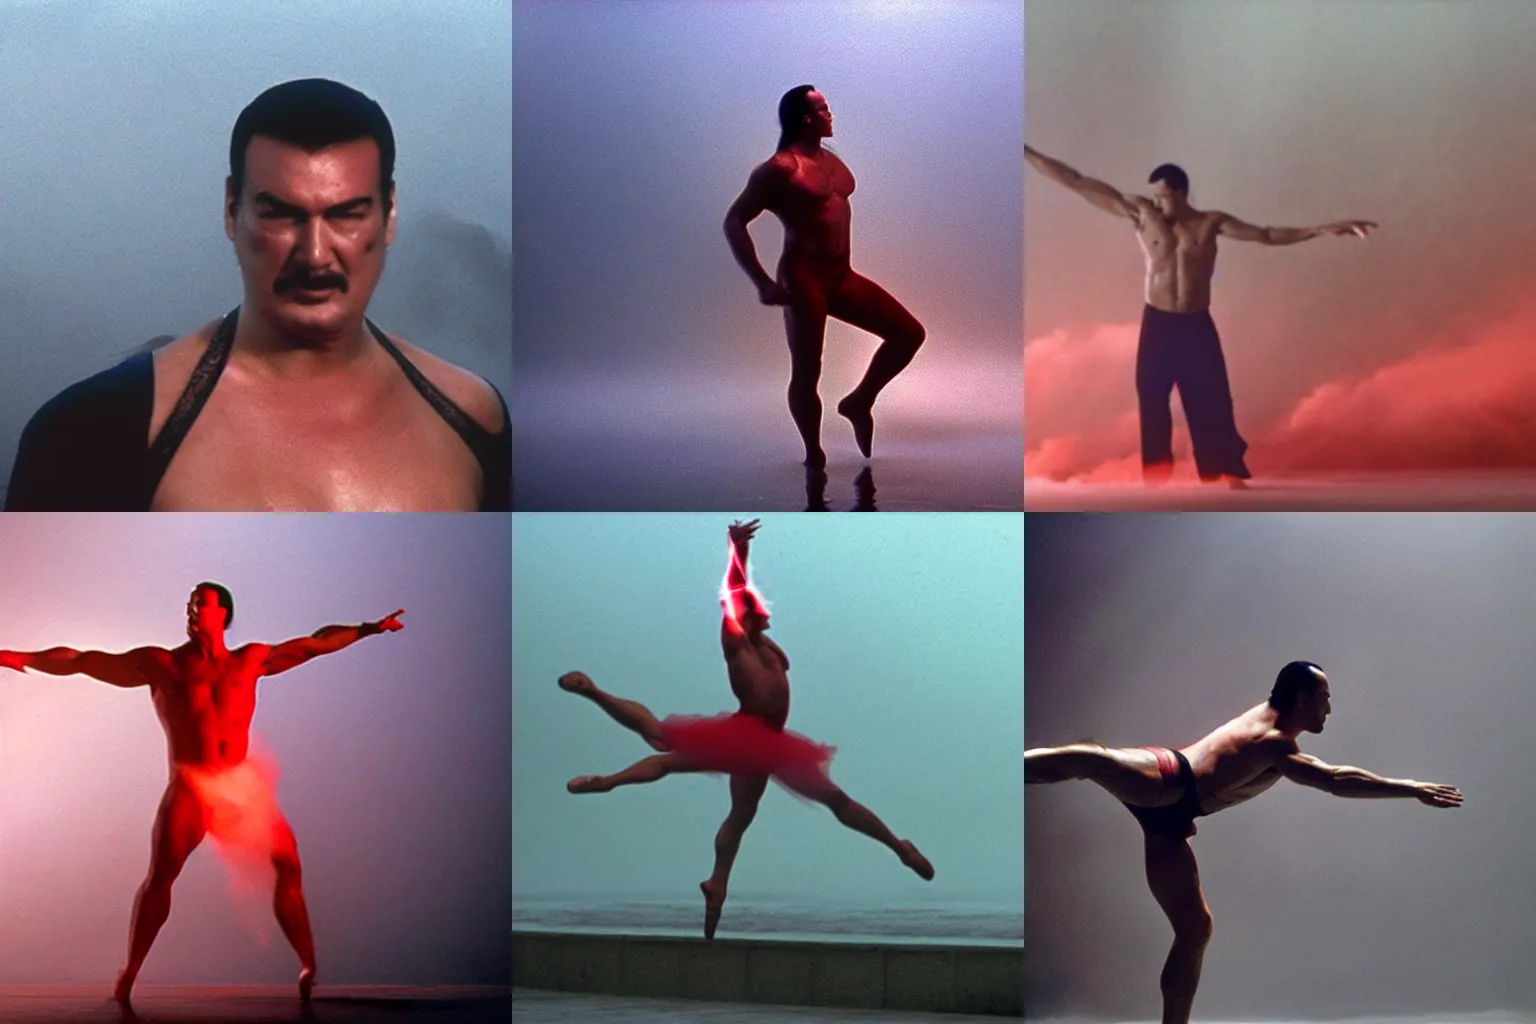 Prompt: steven seagal skinny shirtless doing ballet dramatic red lightning from behind fog